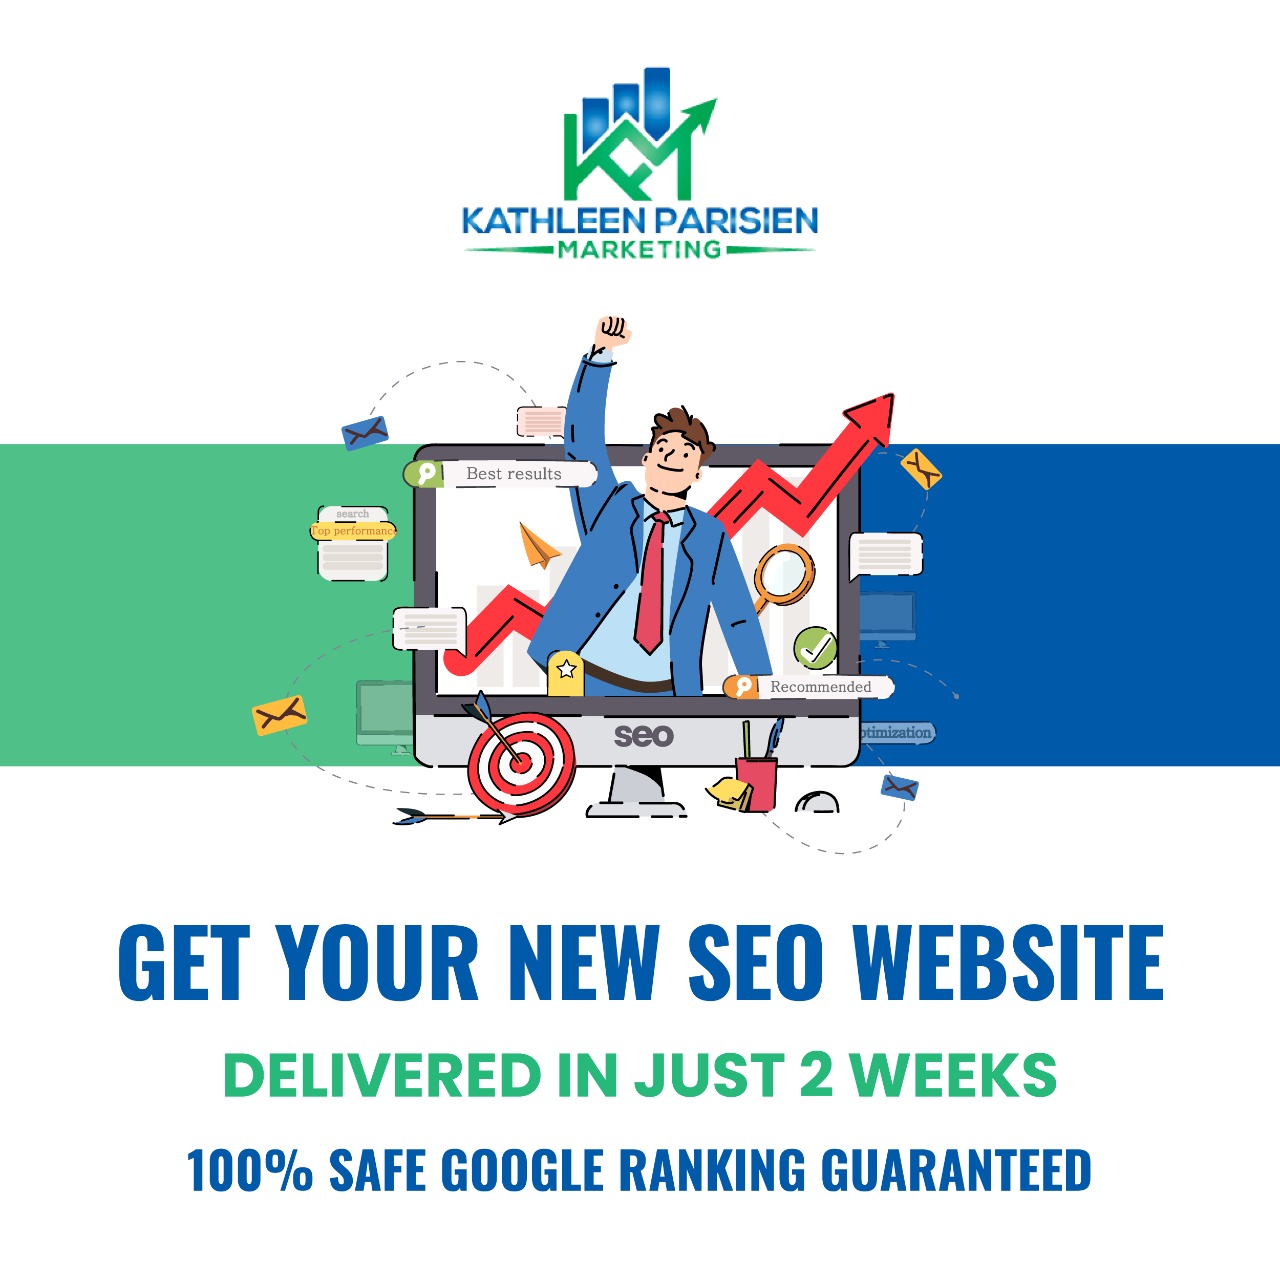 seo web design get your new seo website in just two weeks